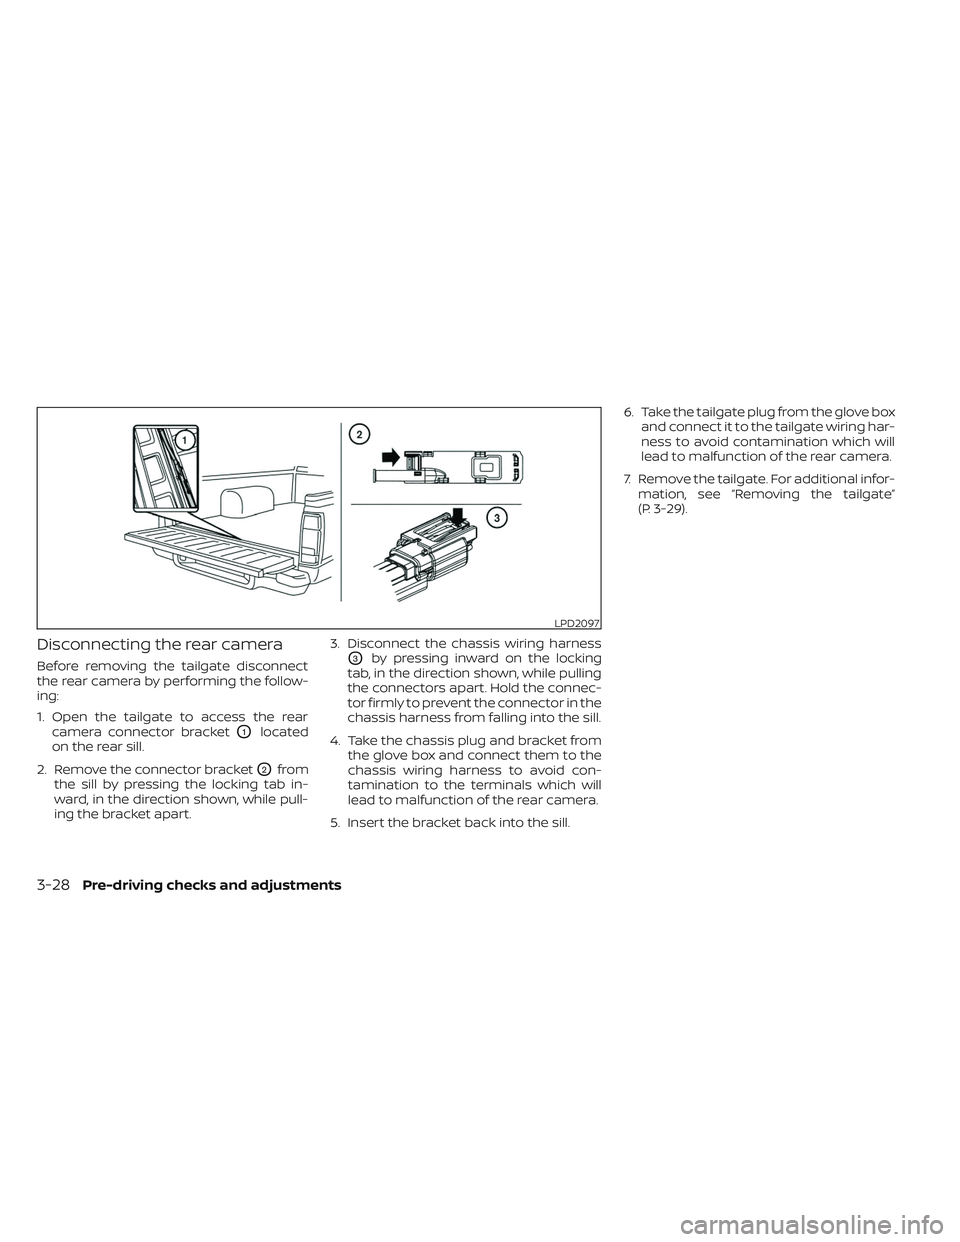 NISSAN FRONTIER 2023  Owners Manual Disconnecting the rear camera
Before removing the tailgate disconnect
the rear camera by performing the follow-
ing:
1. Open the tailgate to access the rearcamera connector bracket
O1located
on the re